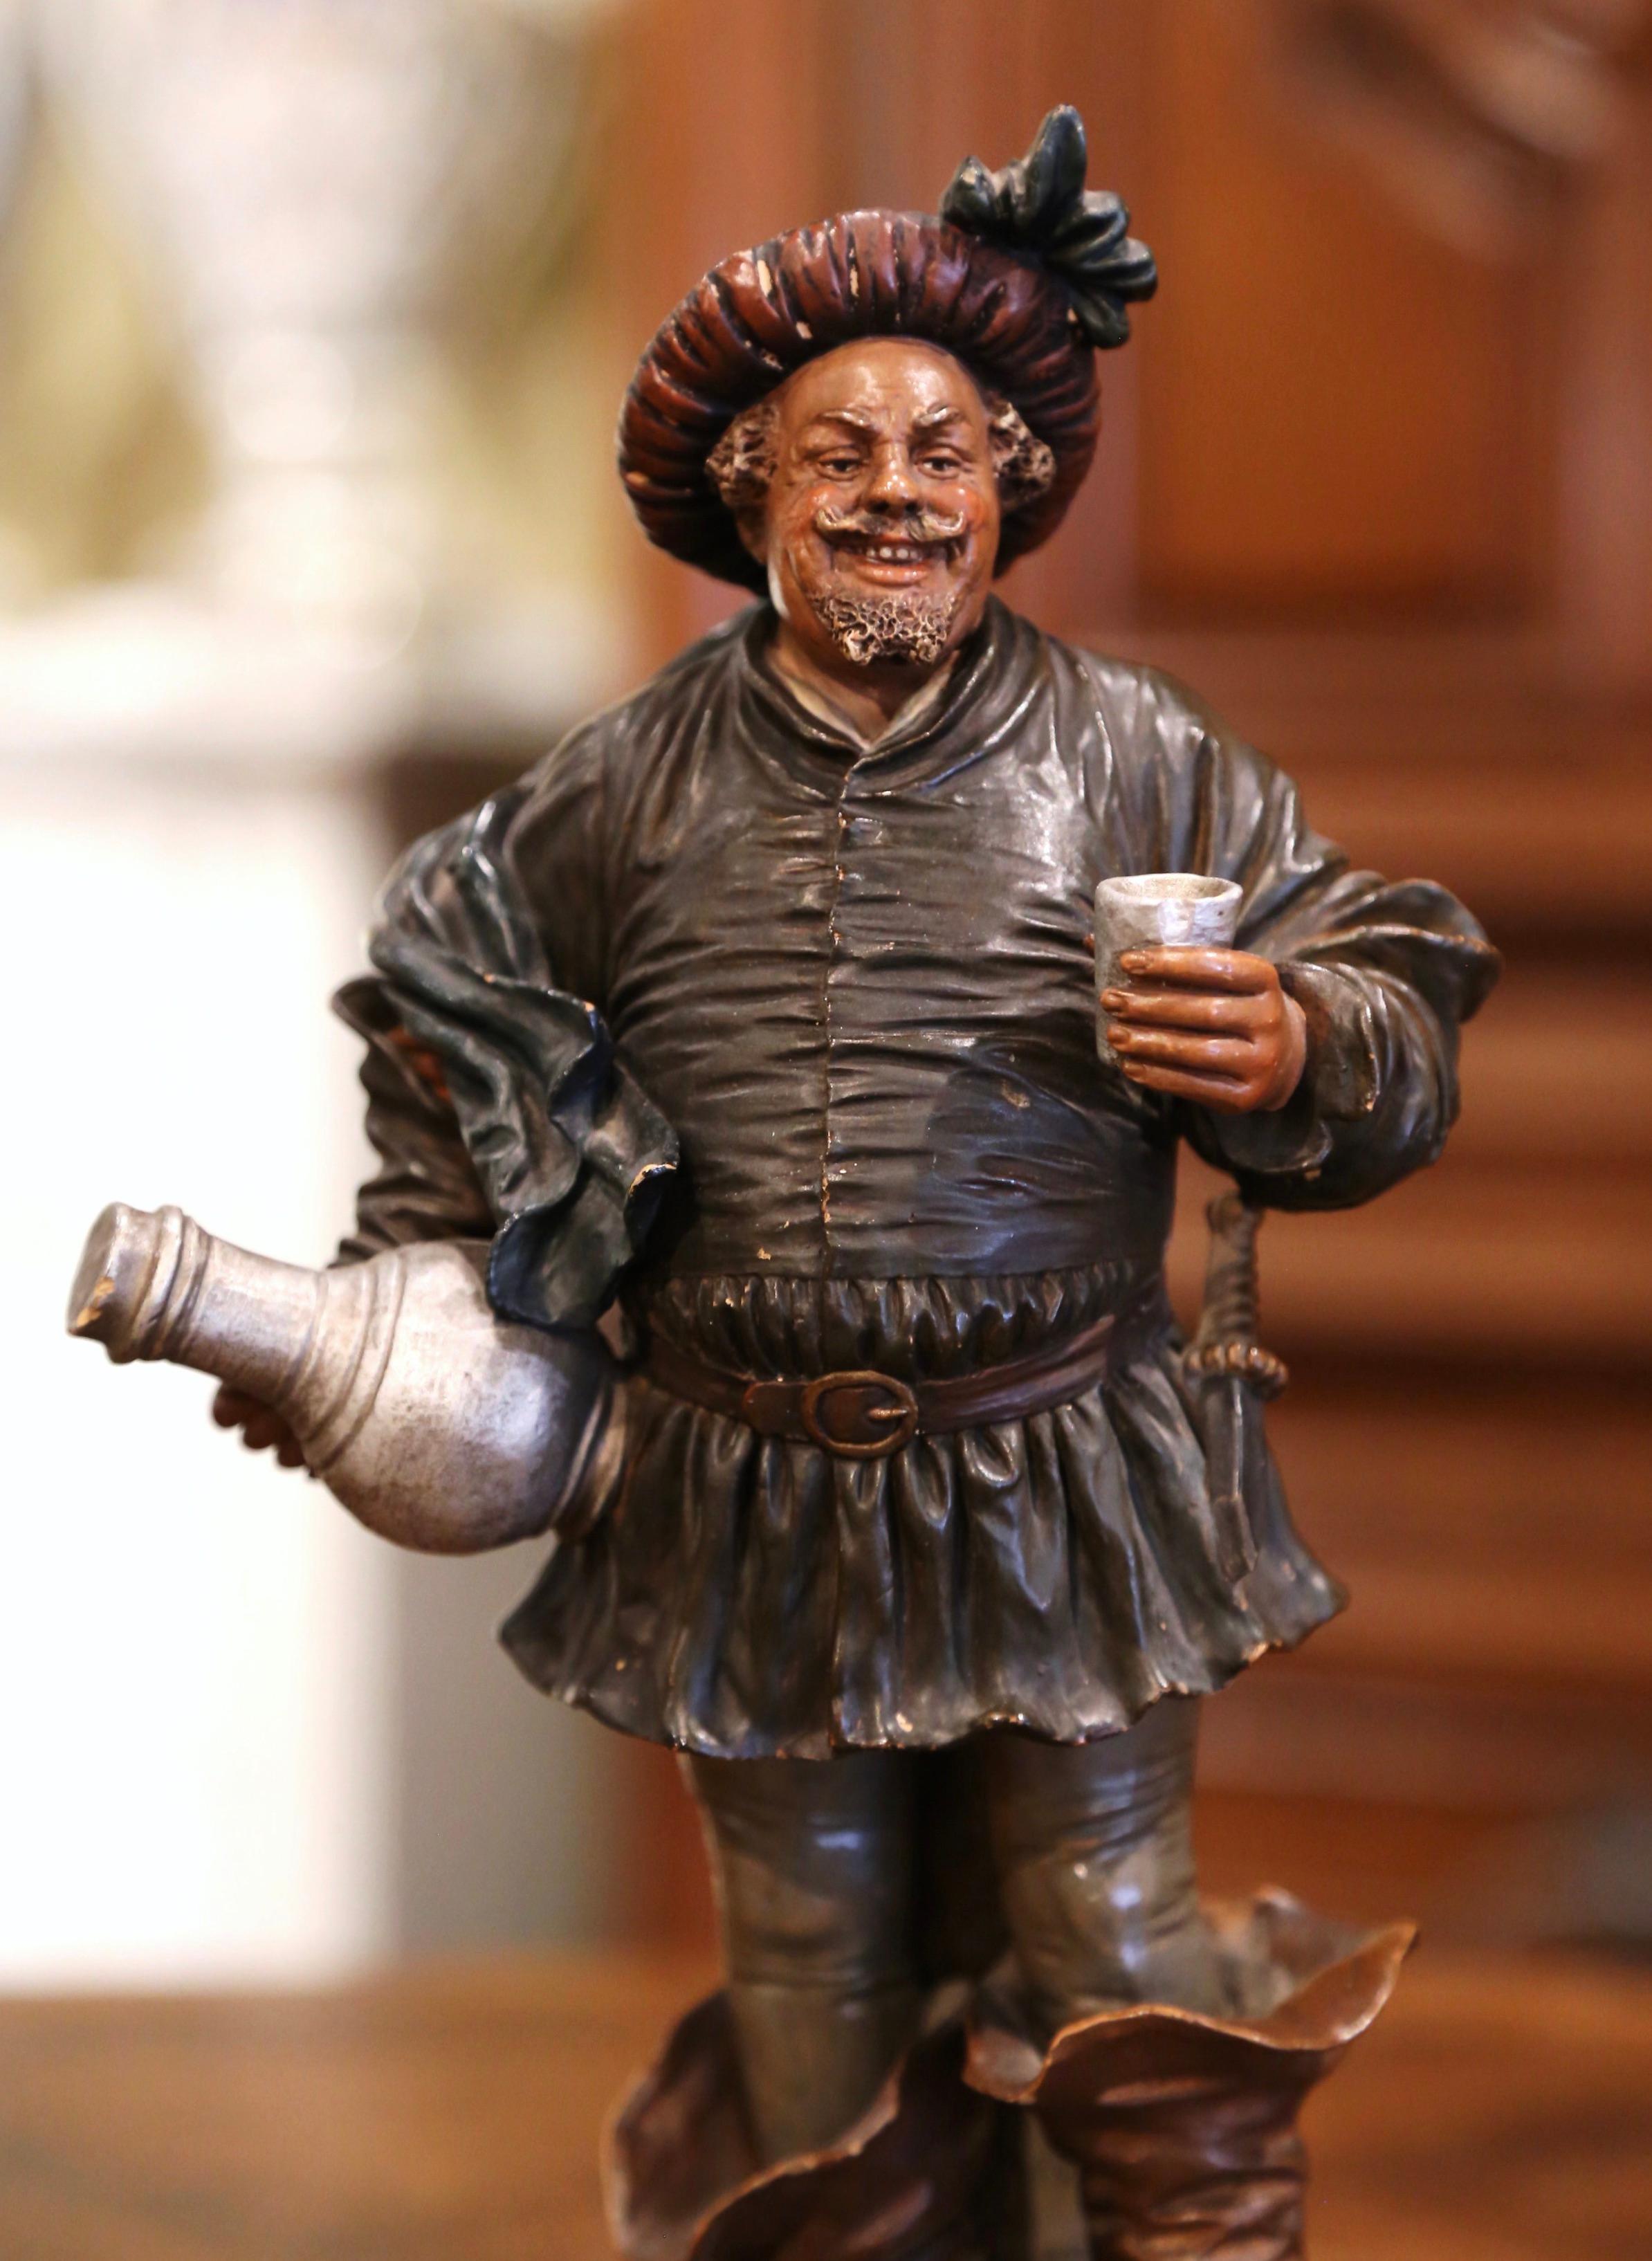 Accessorize your wet bar or wine cellar with this antique musketeer terracotta figurine. Created in Northern France, circa 1890, the 